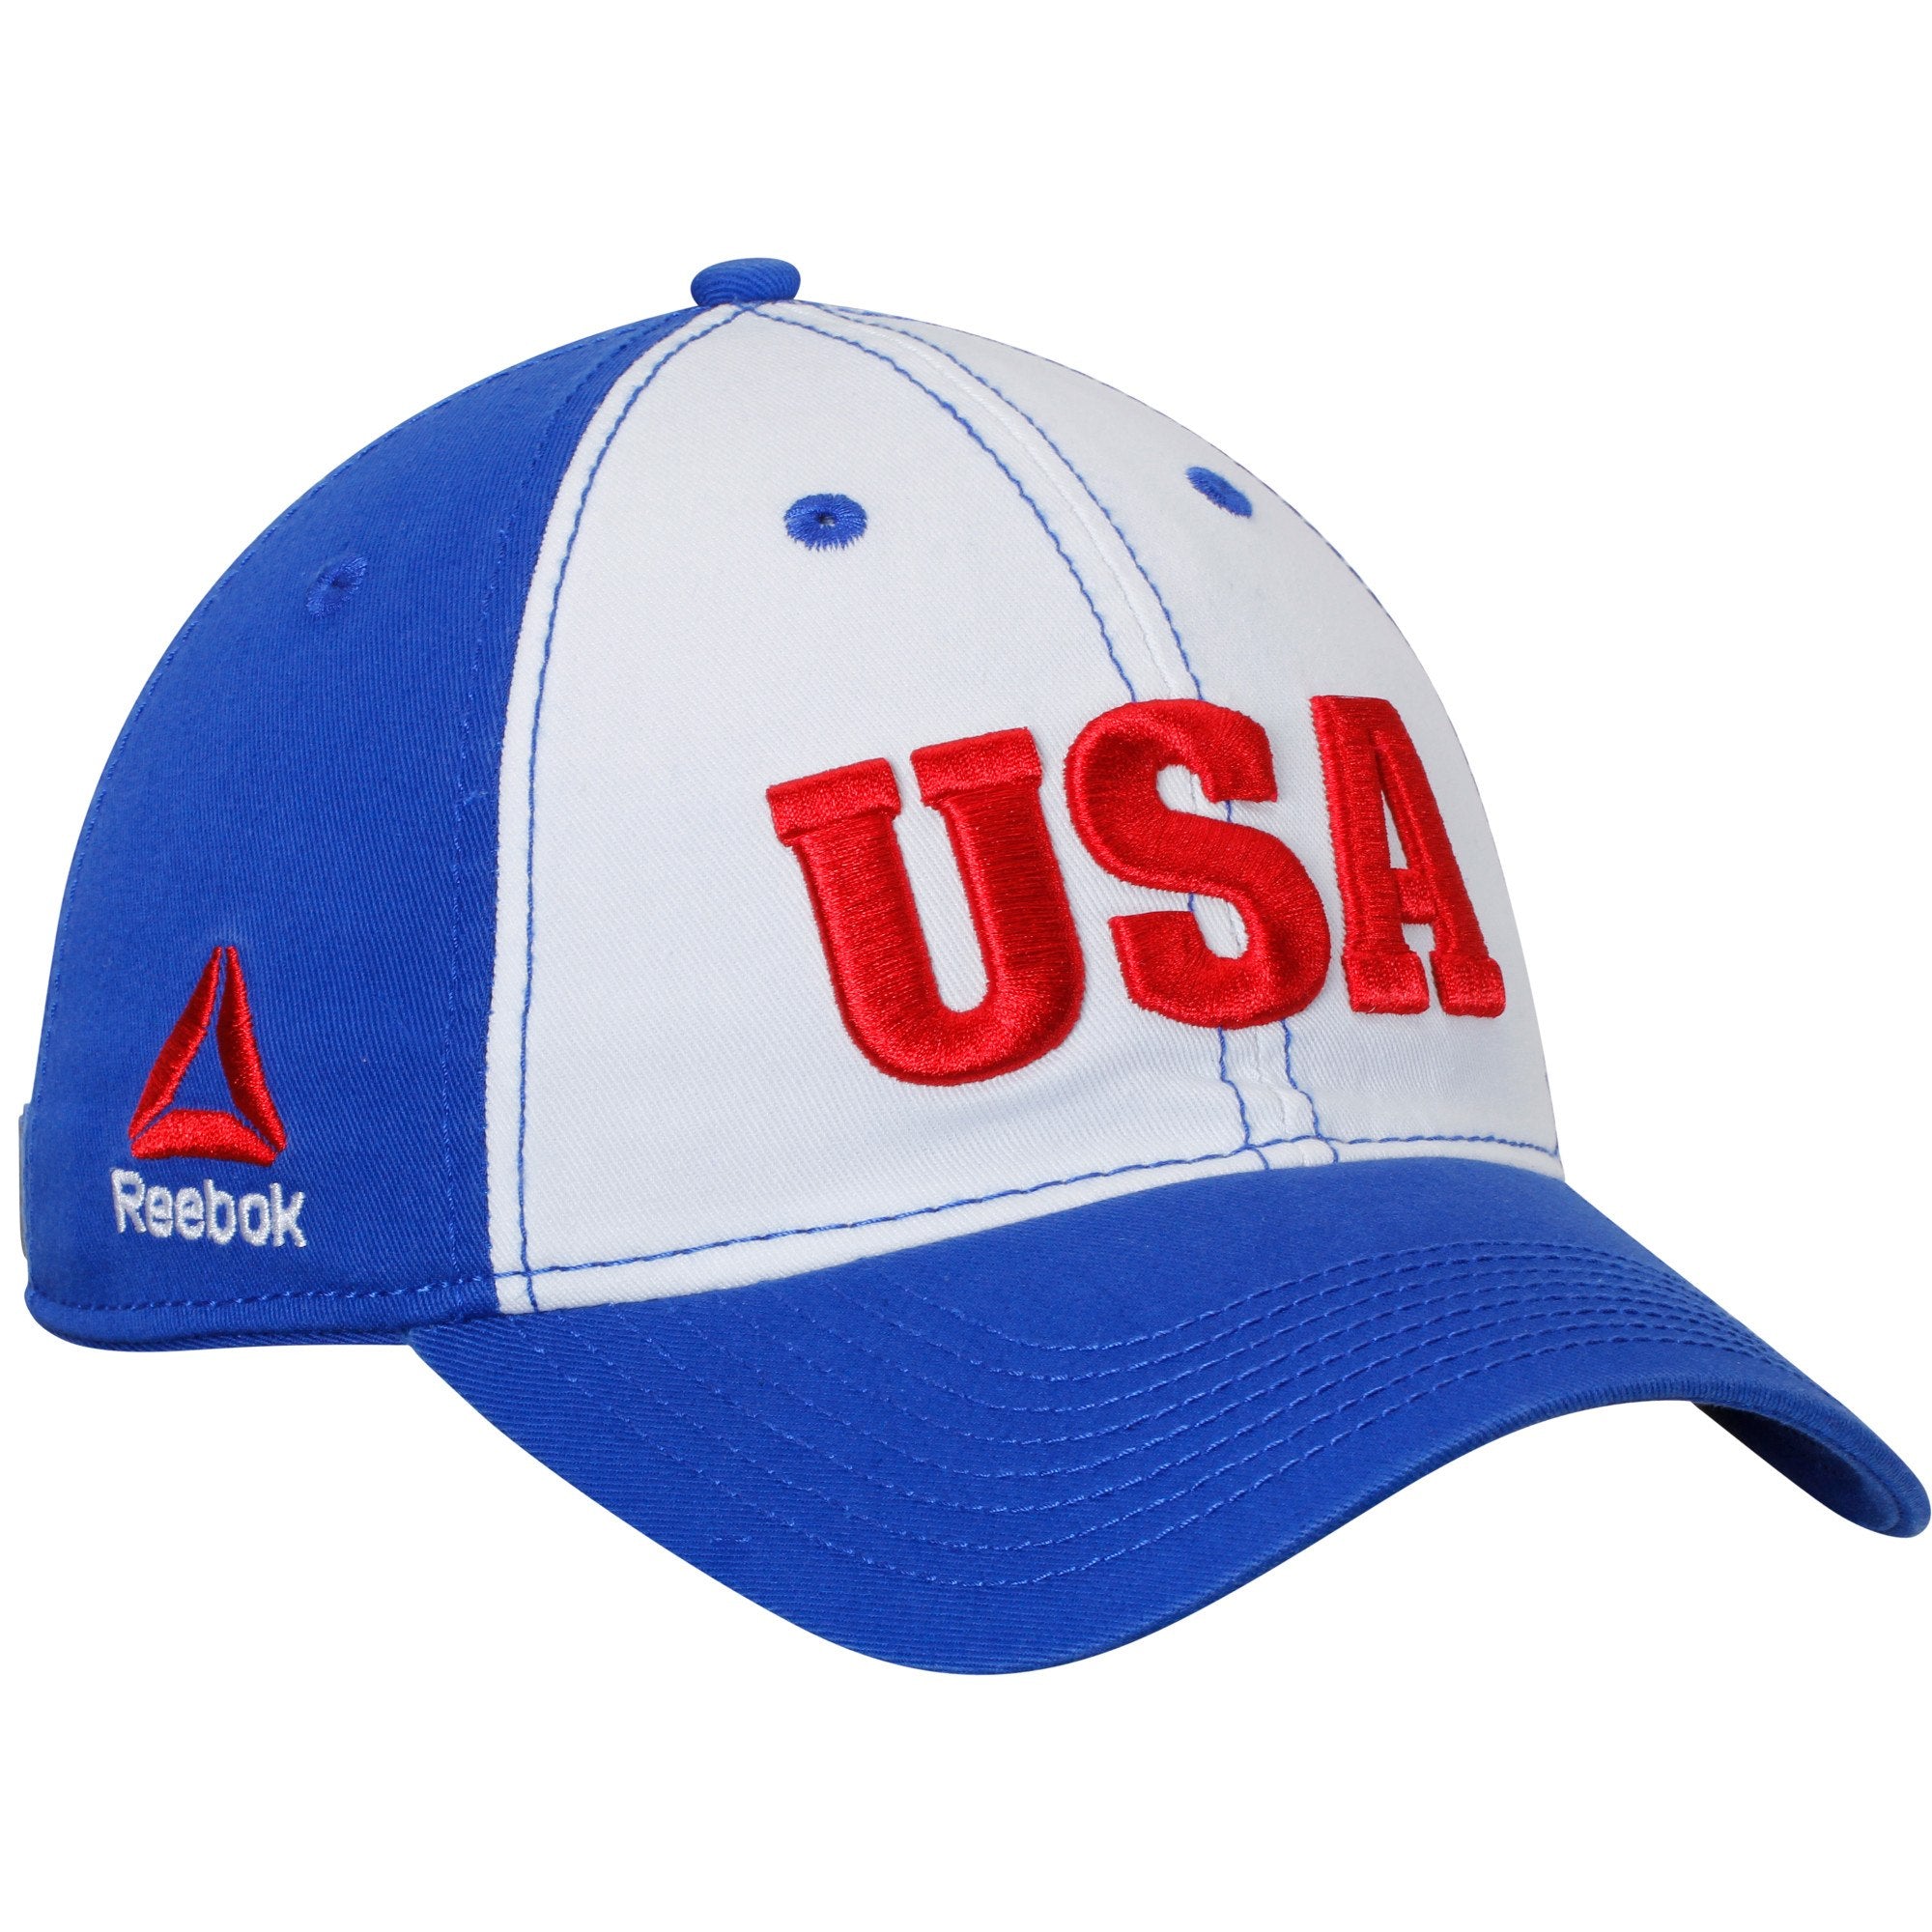 [EZ81Z] UFC USA Country Pride Adjustable Slouch Hat